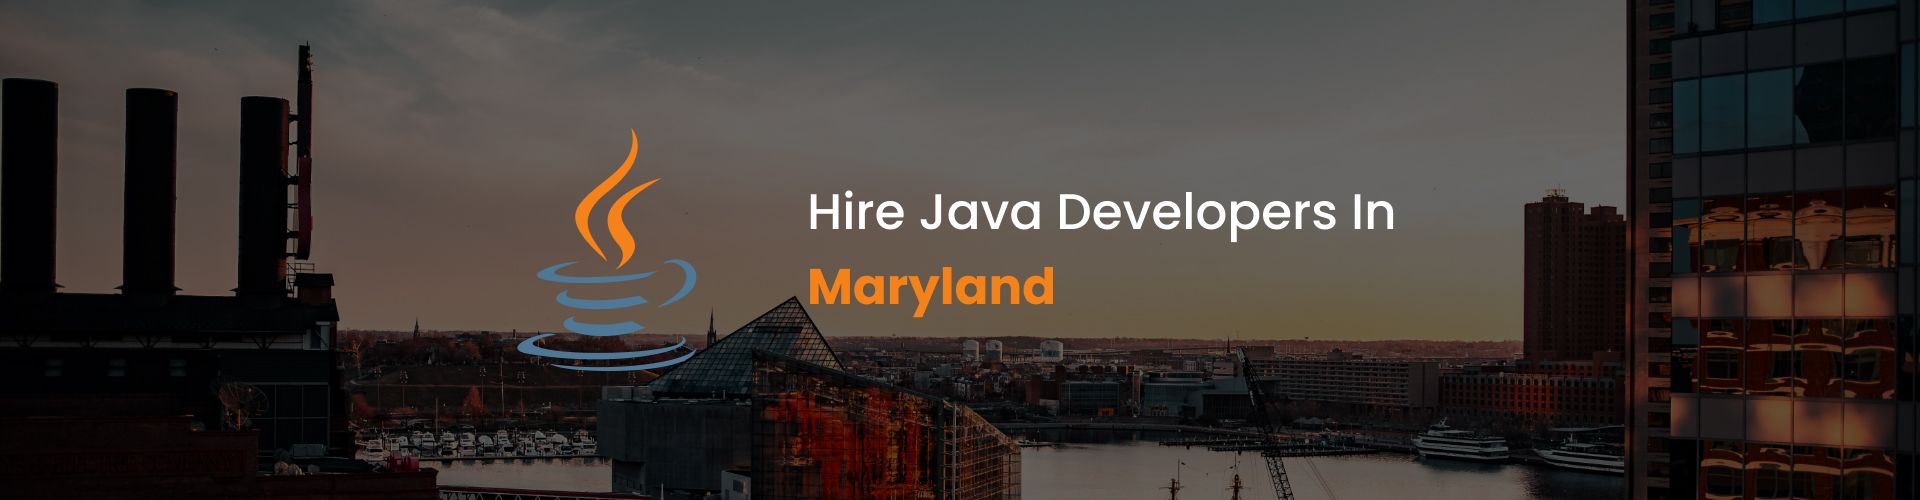 hire java developers in maryland